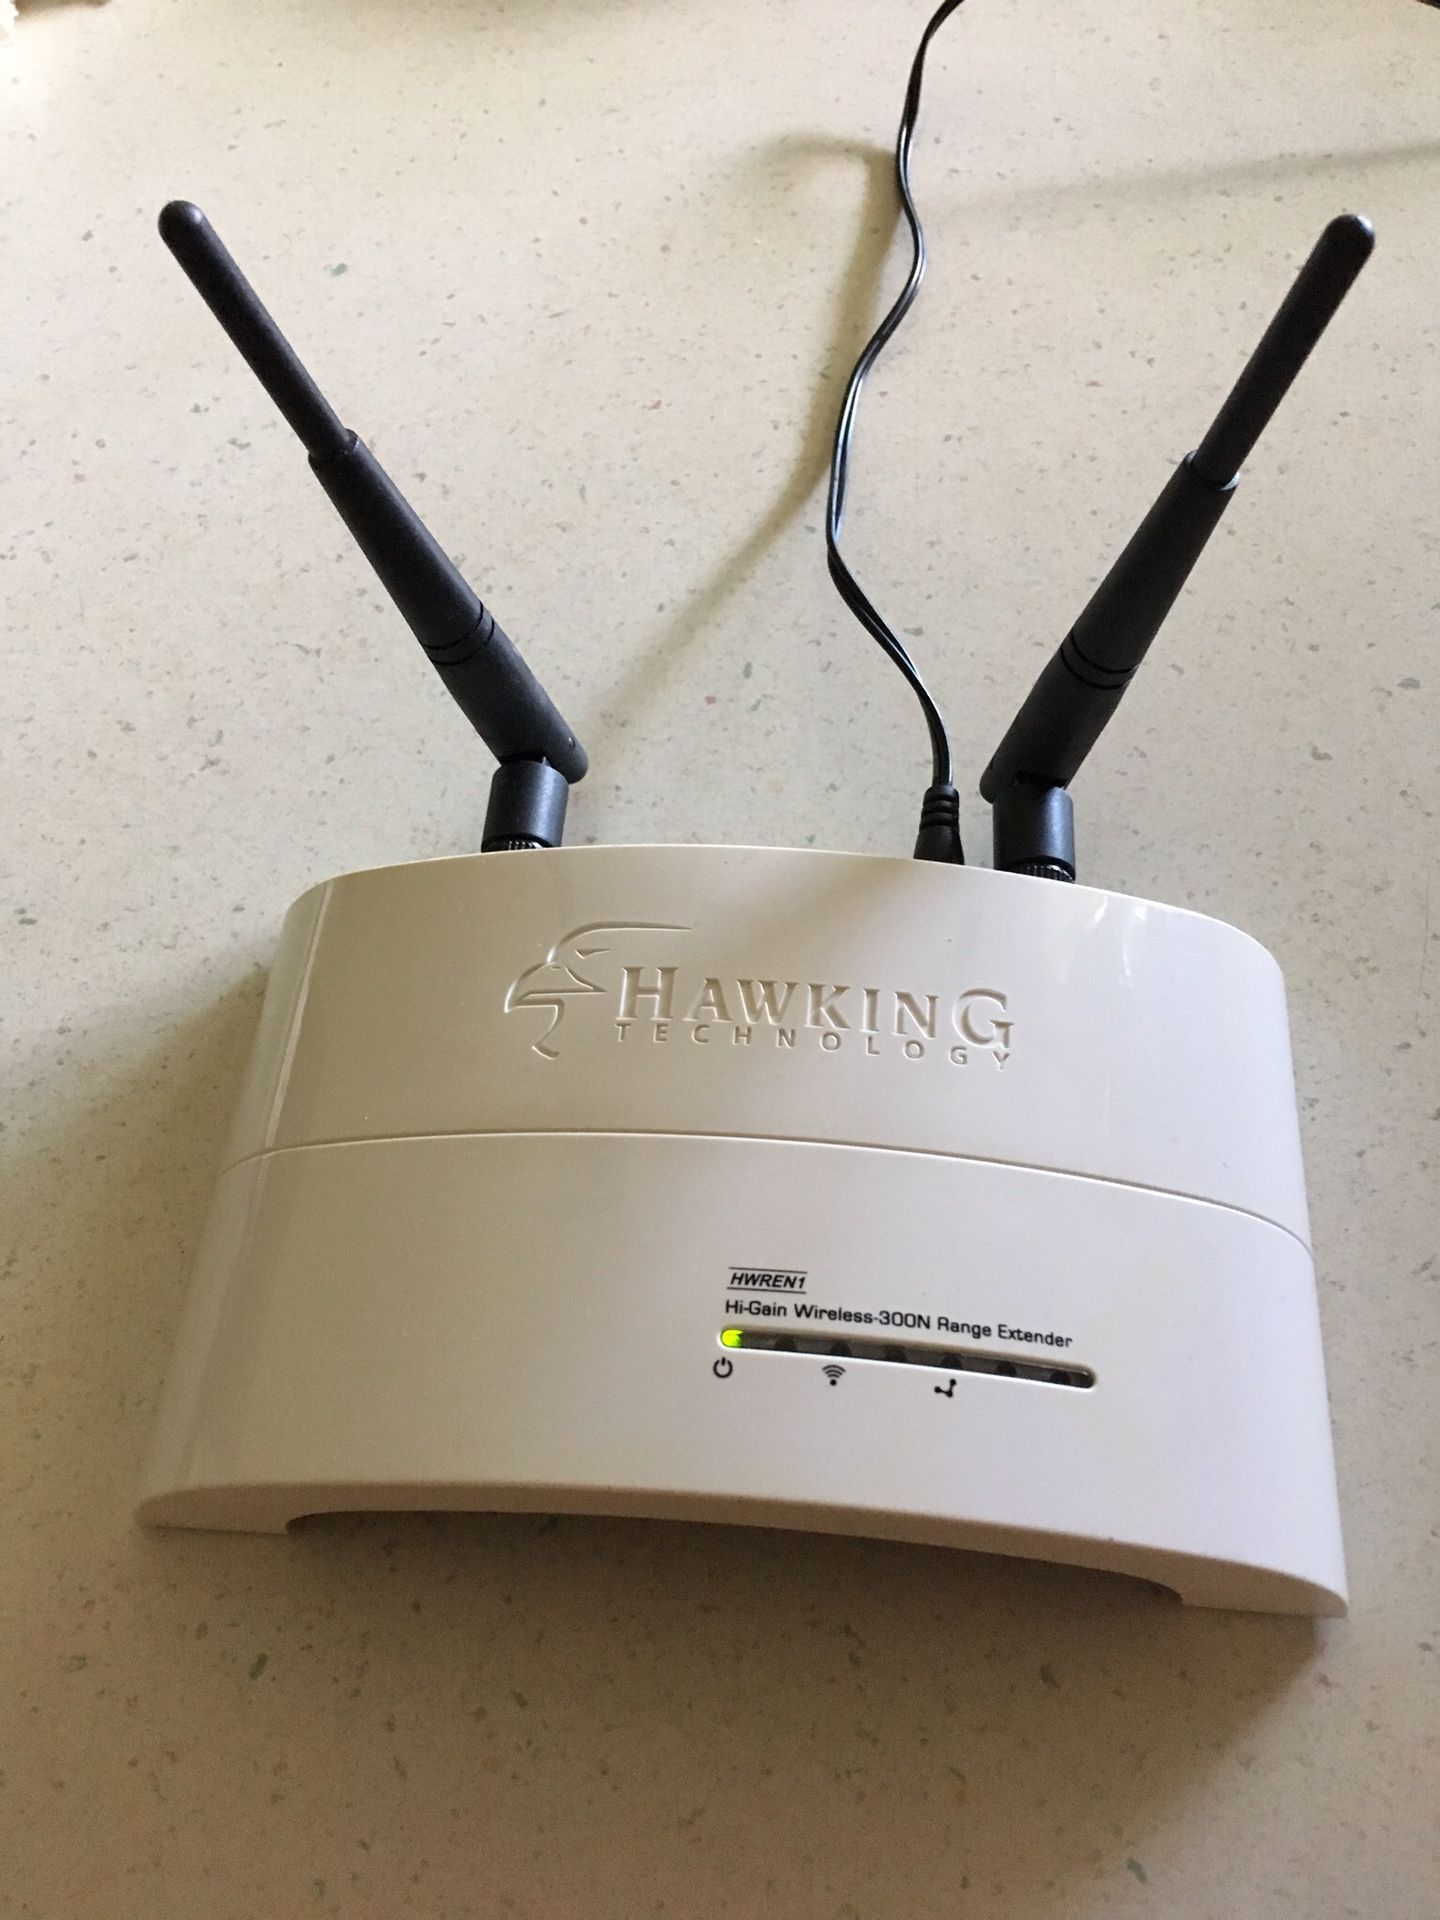 Wireless Router / Range Booster extender 300N WiFi Internet - Gateway Routers Hub - Ethernet Networking - Network DSL Cable